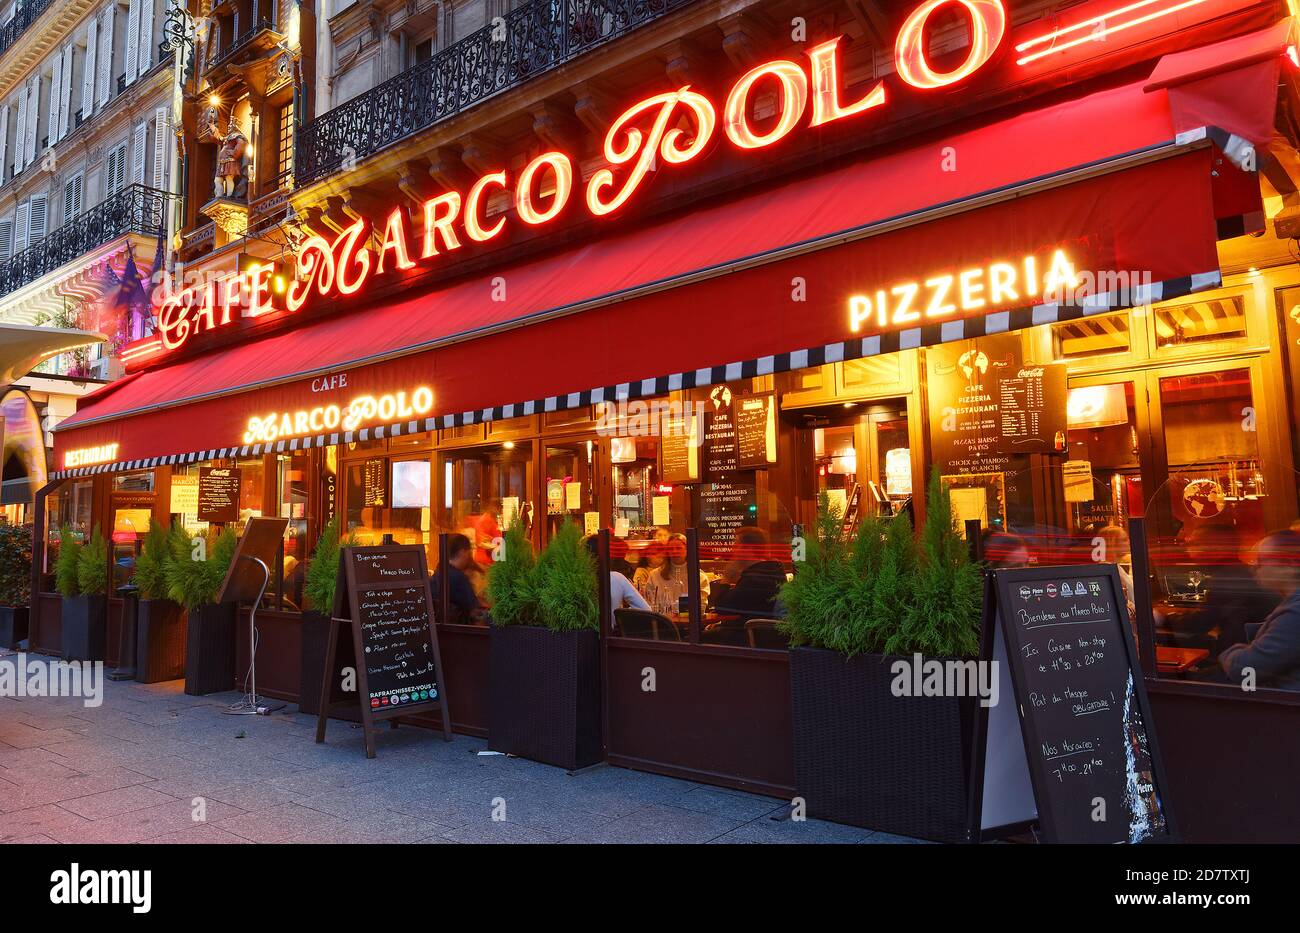 This brasserie style restaurant is named after the explorer Marco Polo  located near Saint Lazare railway station, Paris, France Stock Photo - Alamy